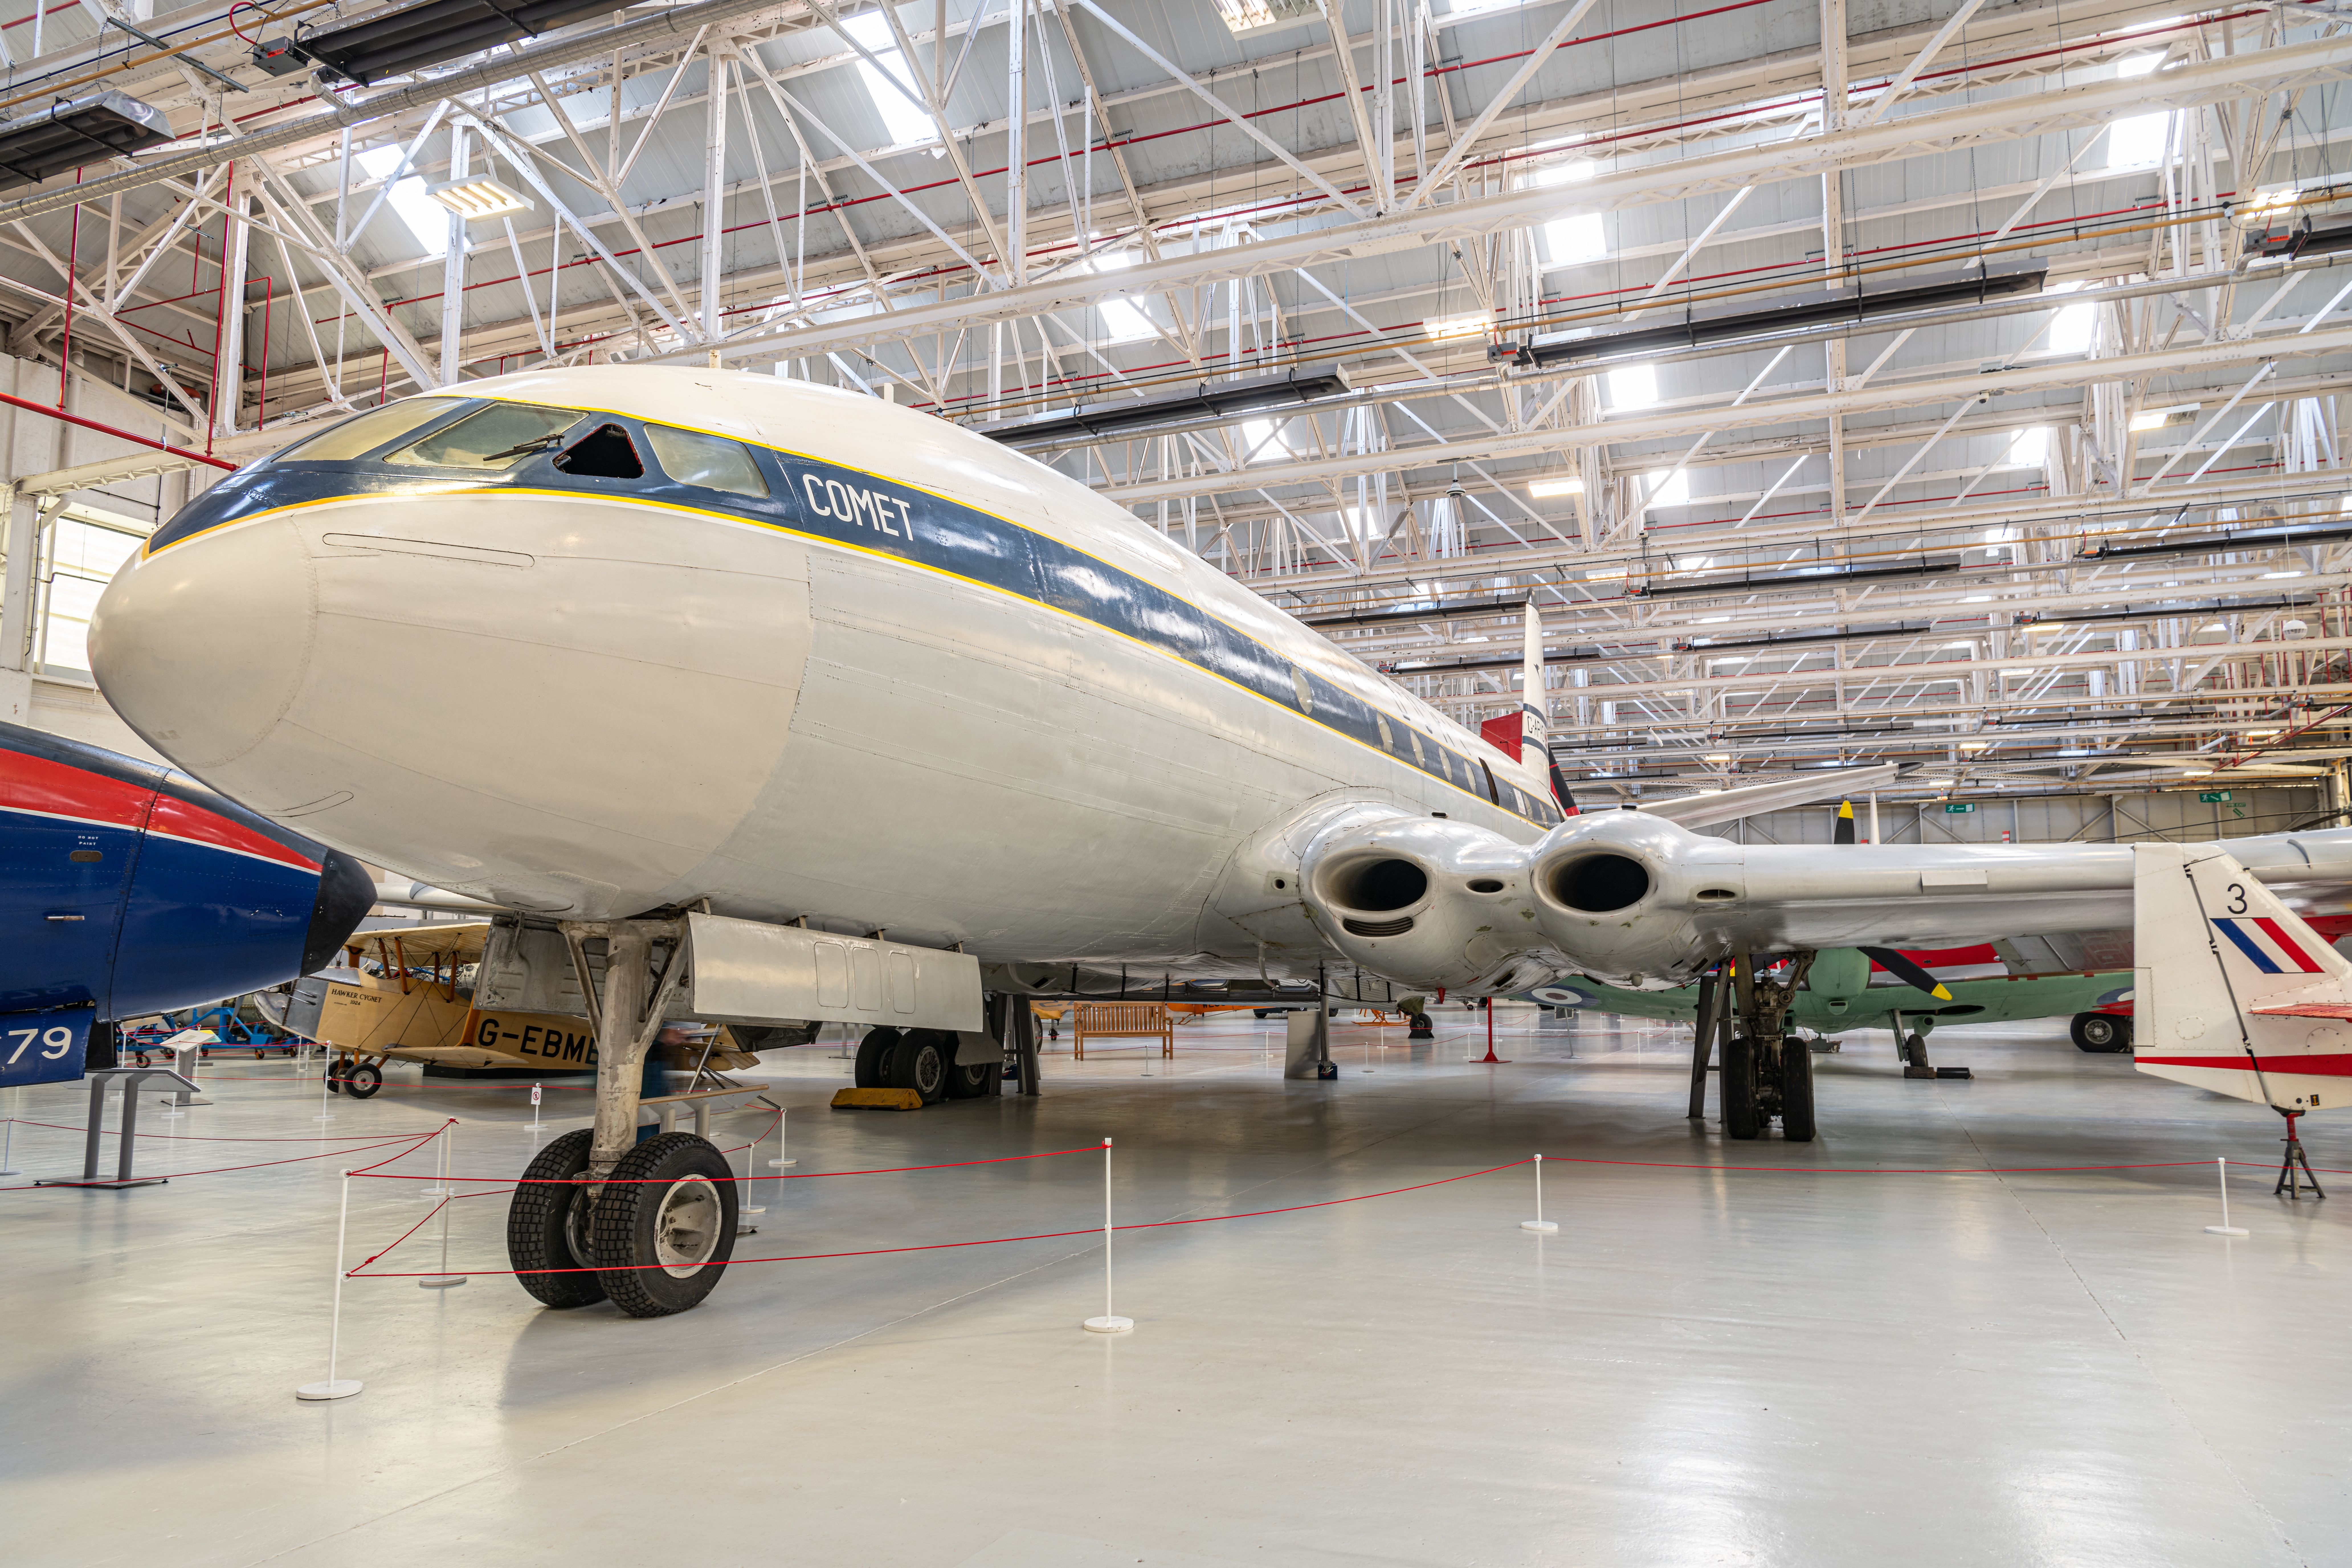 A DeHavilland Comet Airliner at the RAF Museum.